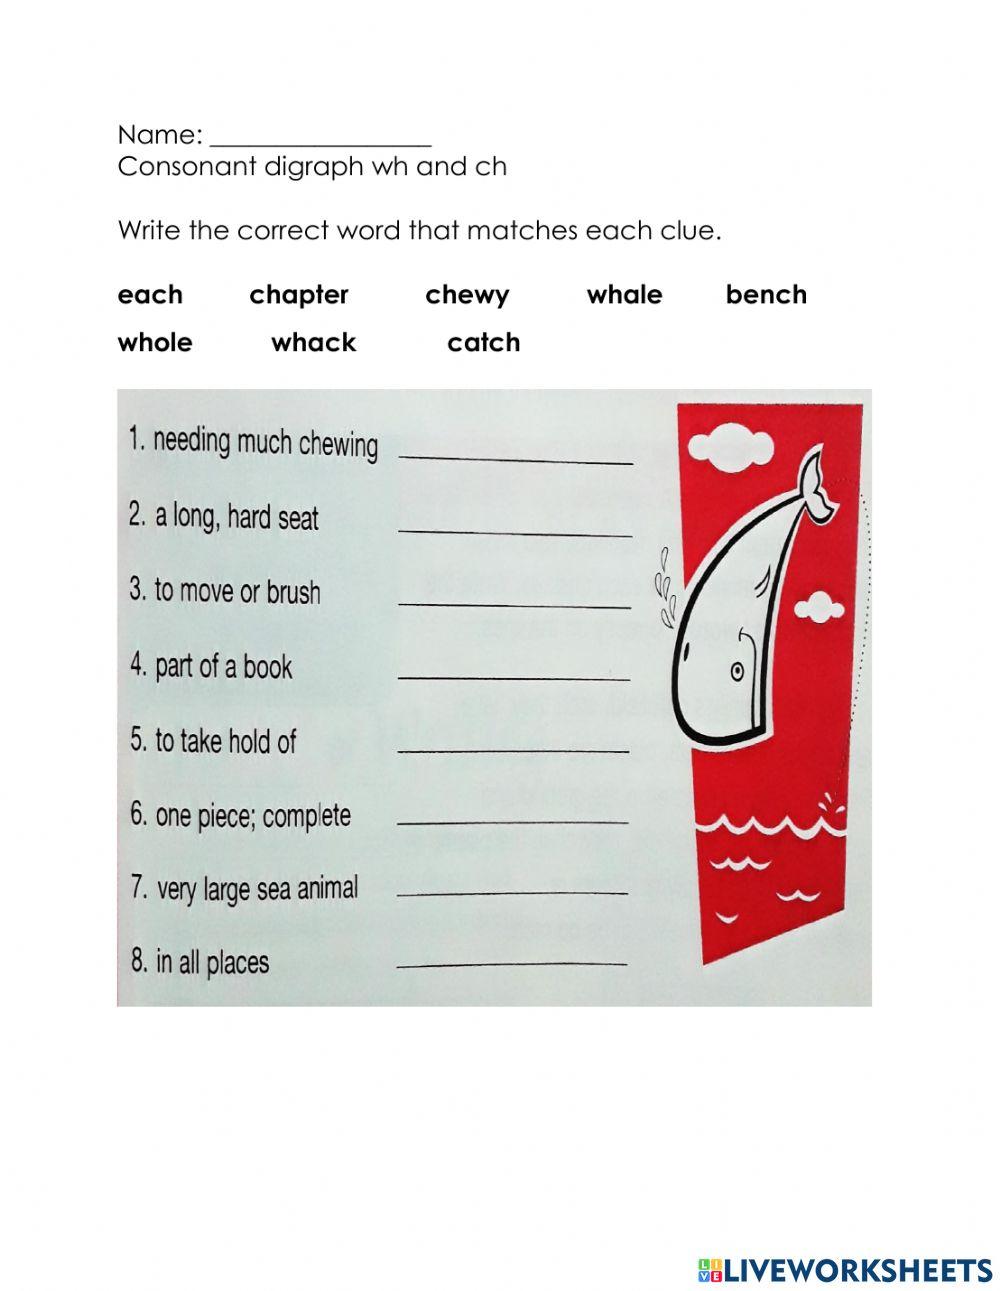 Consonant digraphs ch and wh